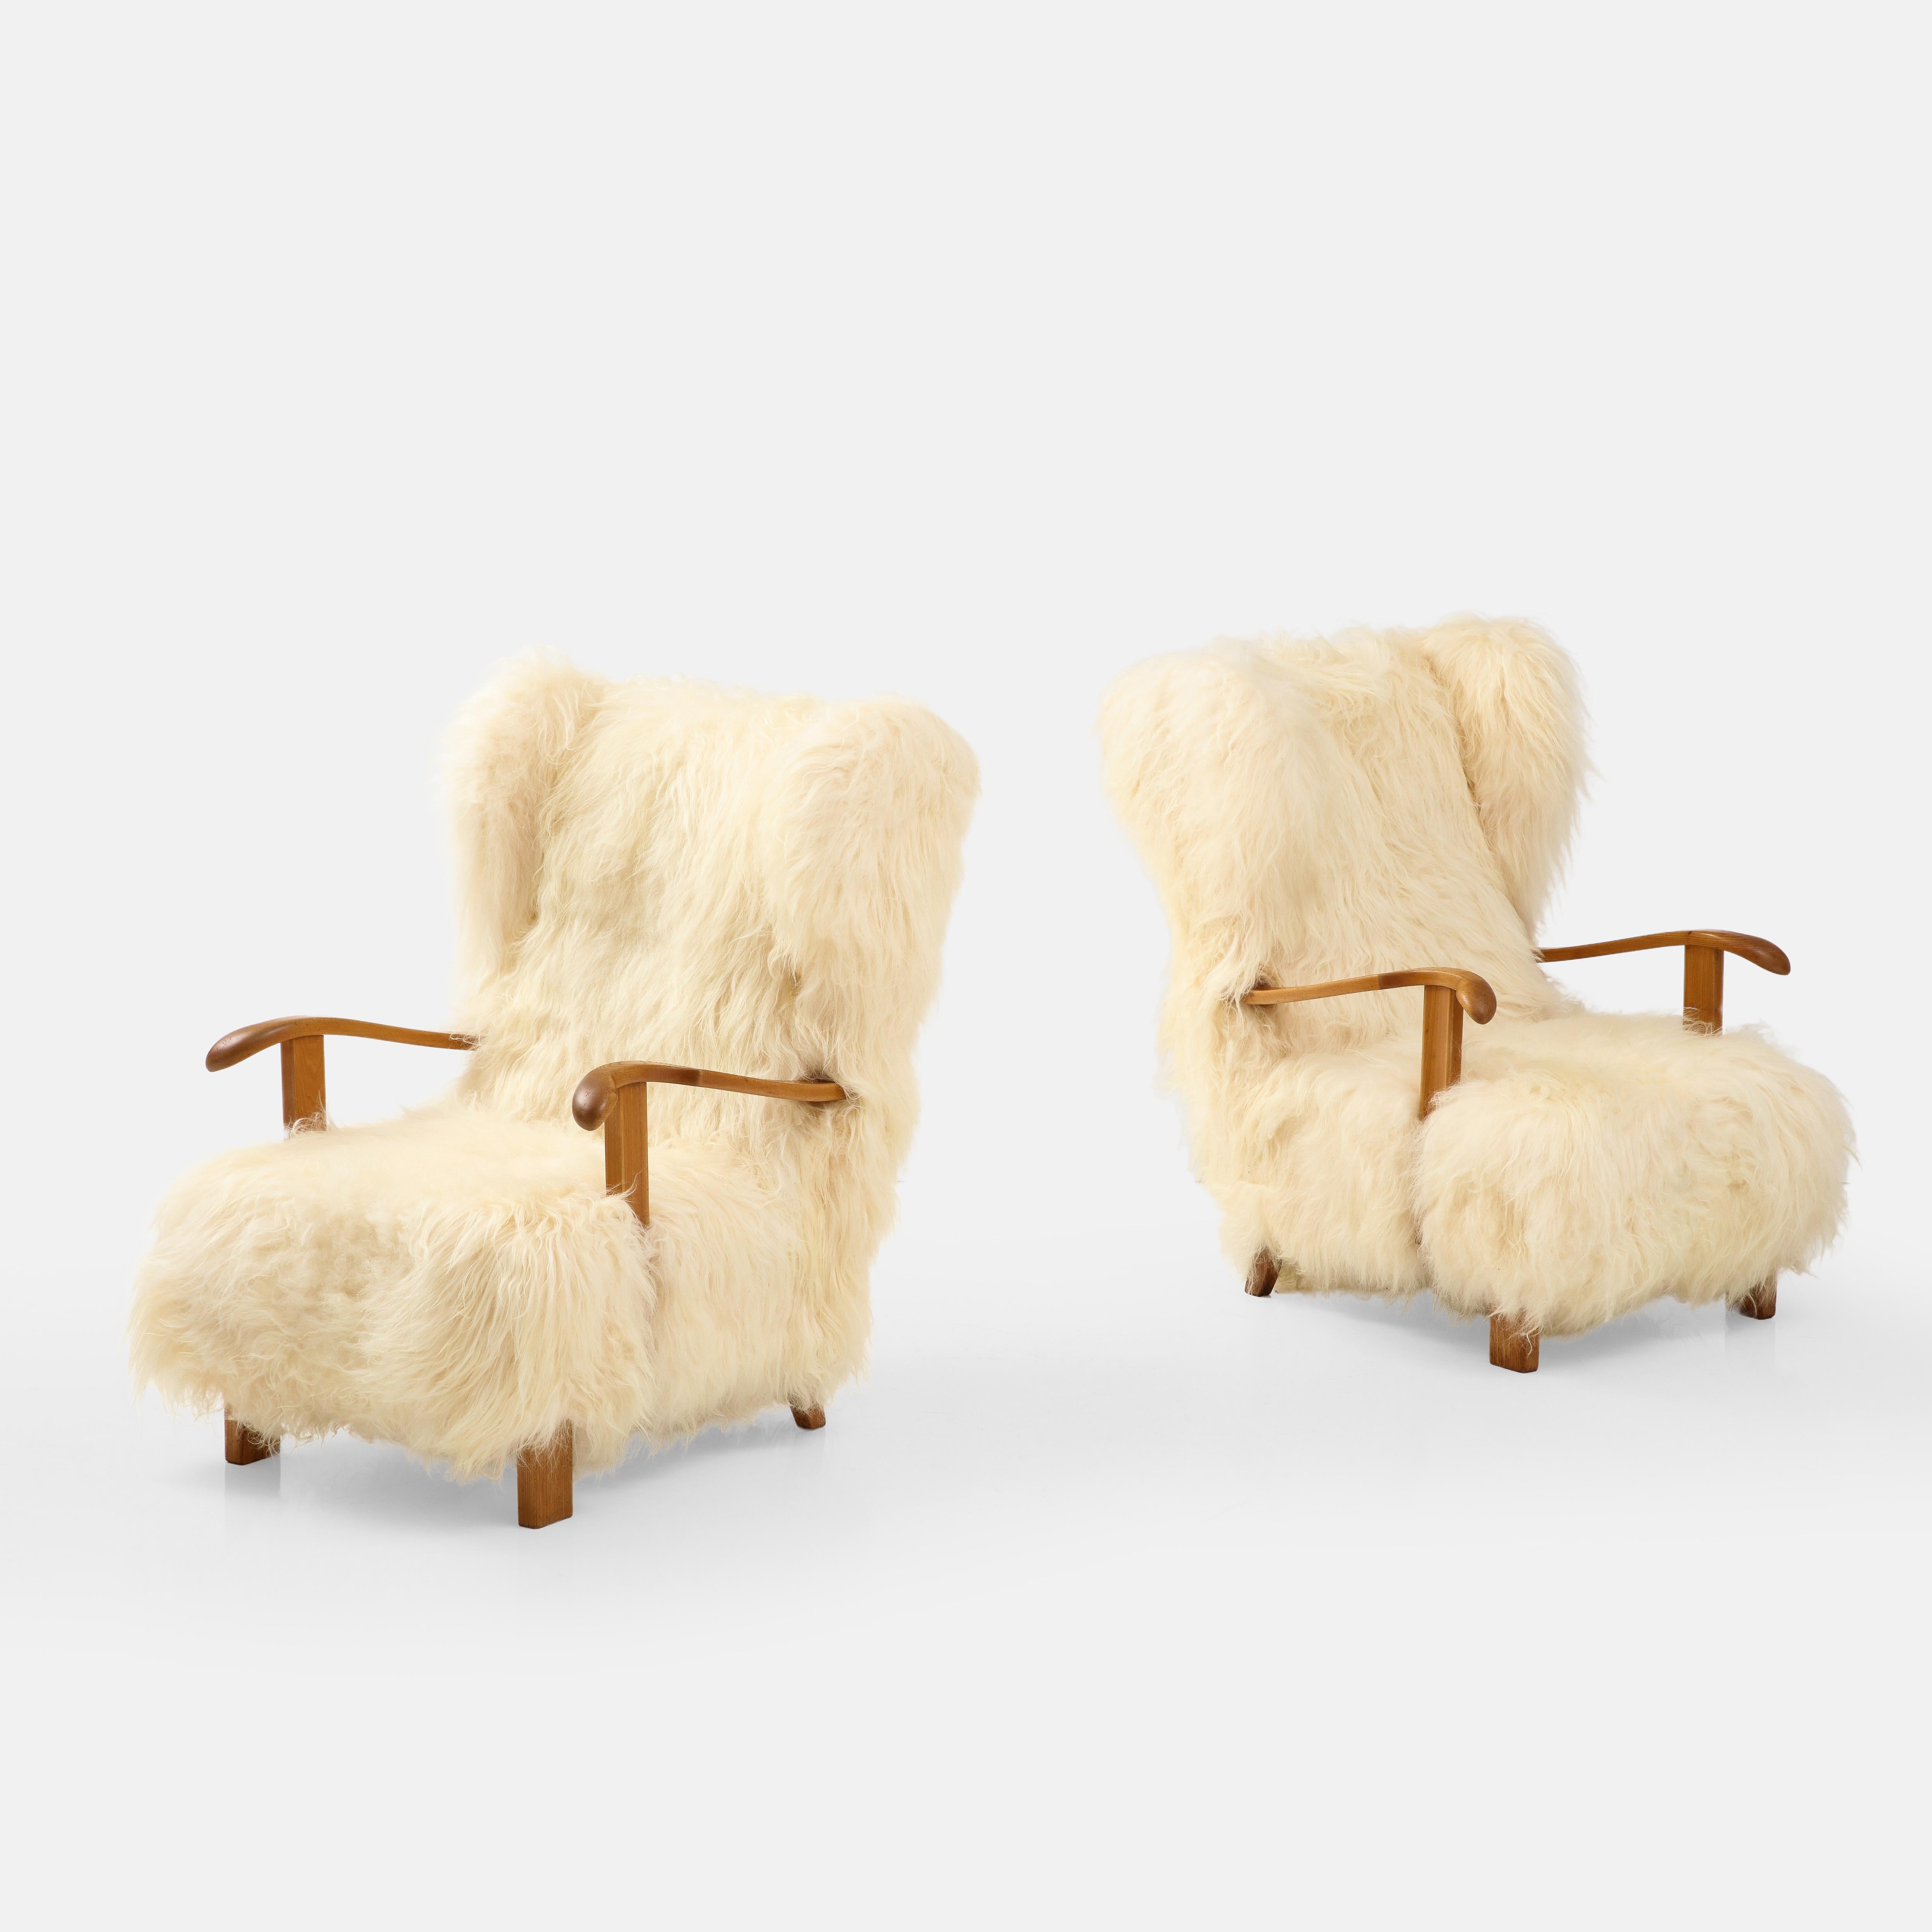 Fritz Hansen Rare Pair of Wingback Lounge Chairs Model 1582 in Sheepskin, 1930s In Good Condition For Sale In New York, NY